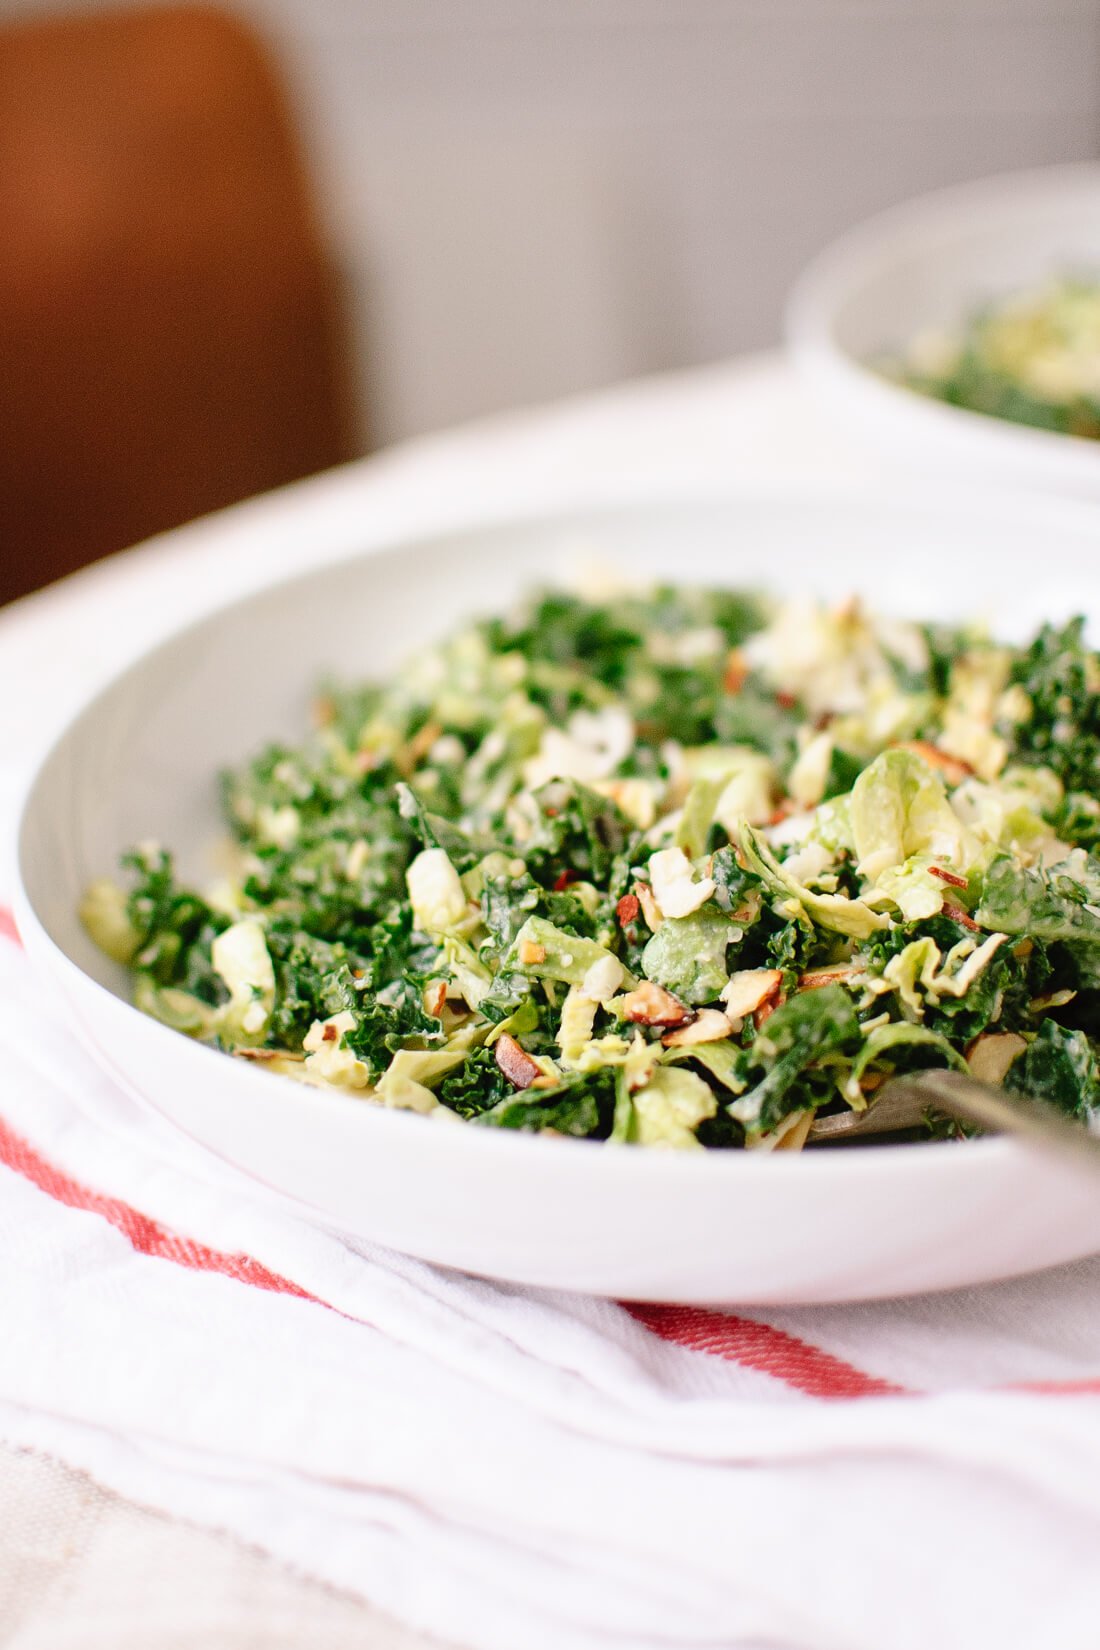 Raw kale and brussels sprouts salad with tahini-maple dressing and toasted almonds